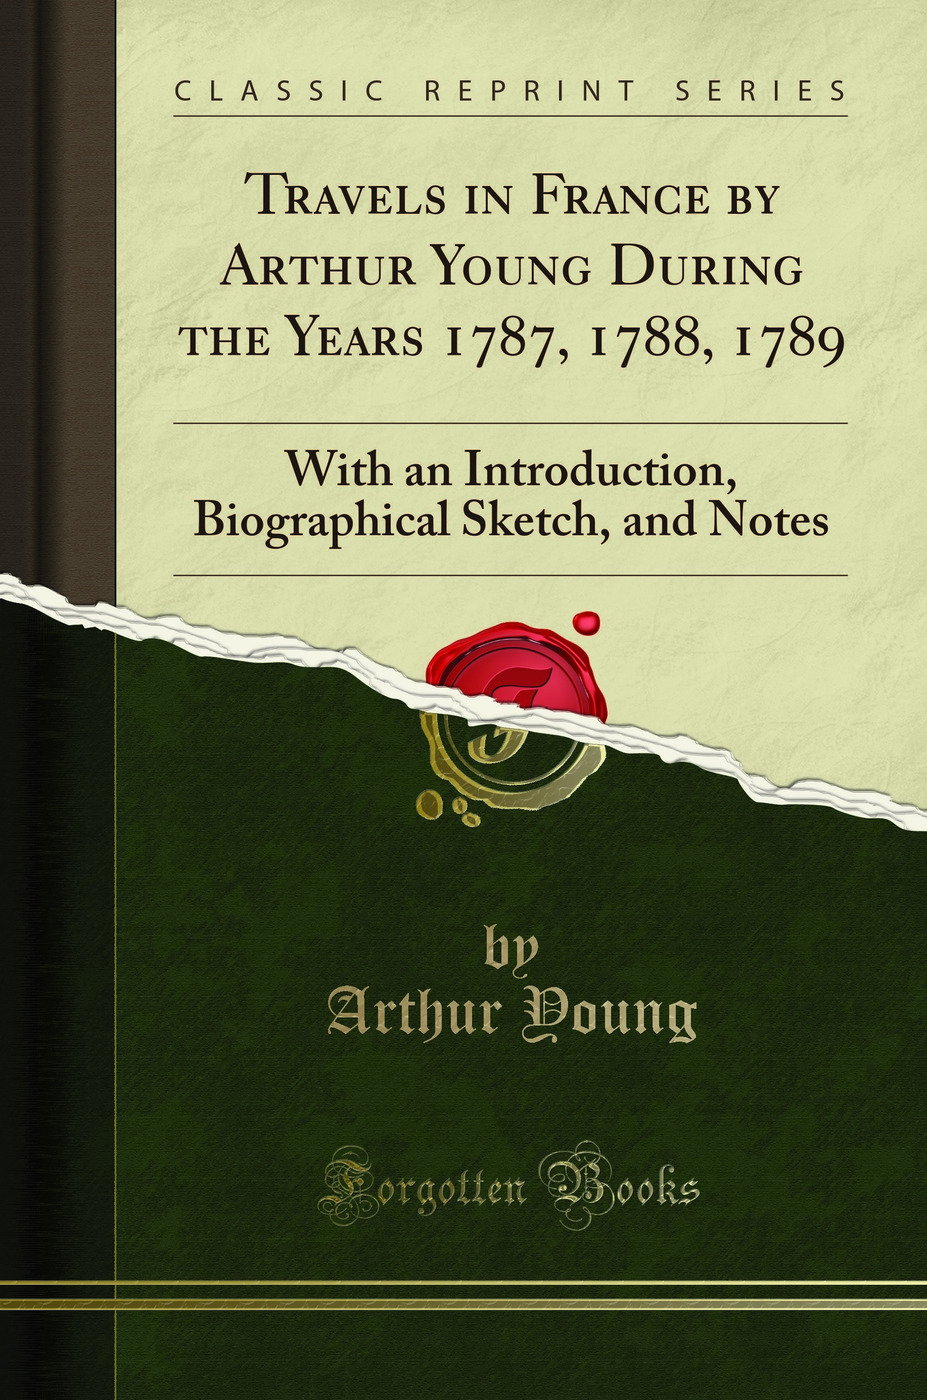 Travels in France by Arthur Young During the Years 1787, 1788, 1789 - Arthur Young